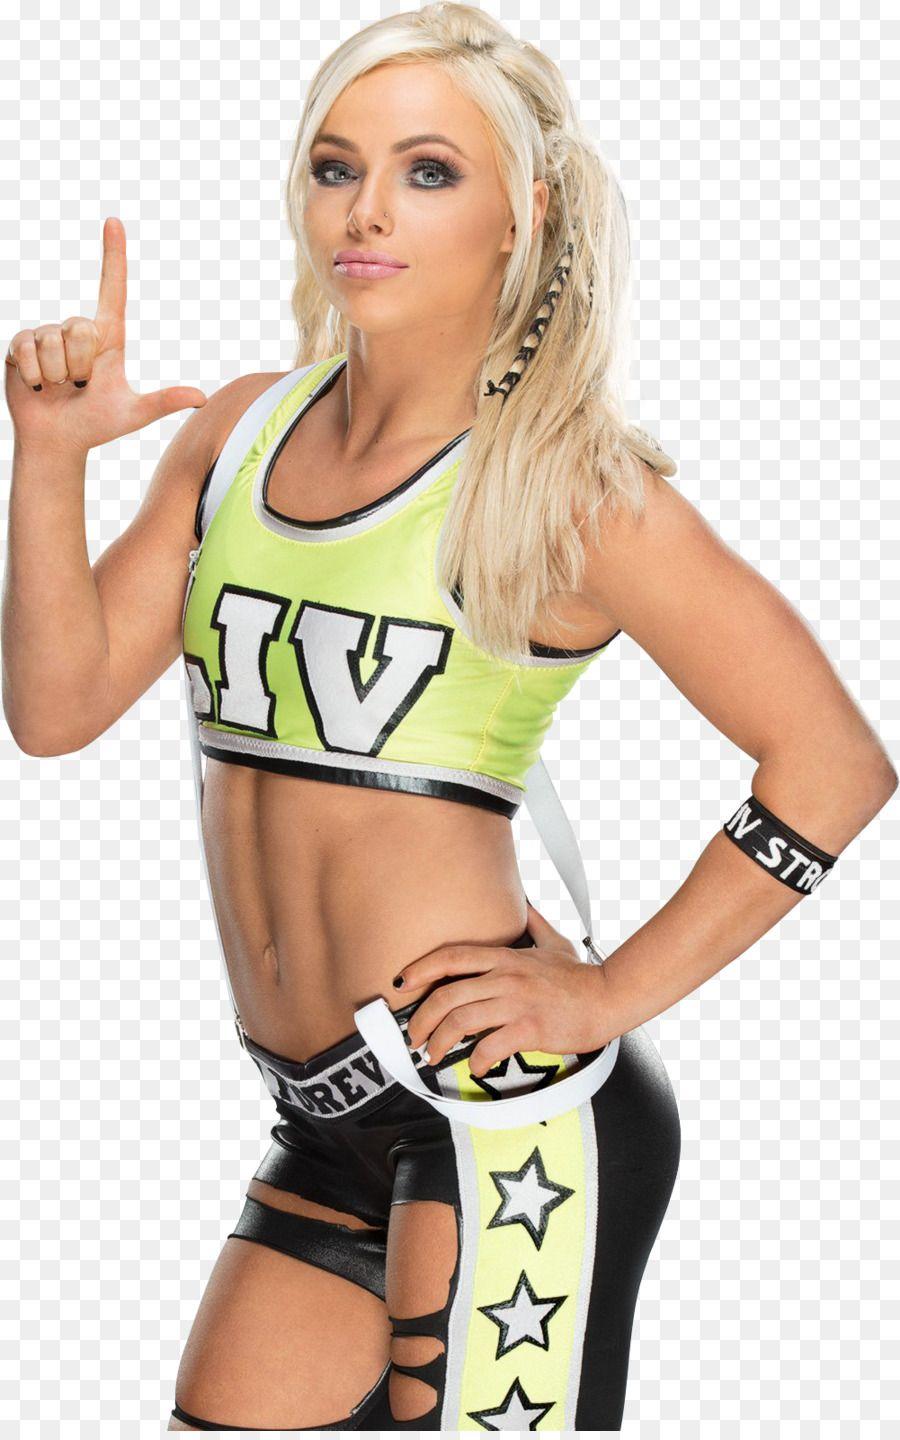 Liv Morgan WWE SmackDown The Riott Squad Women in WWE png